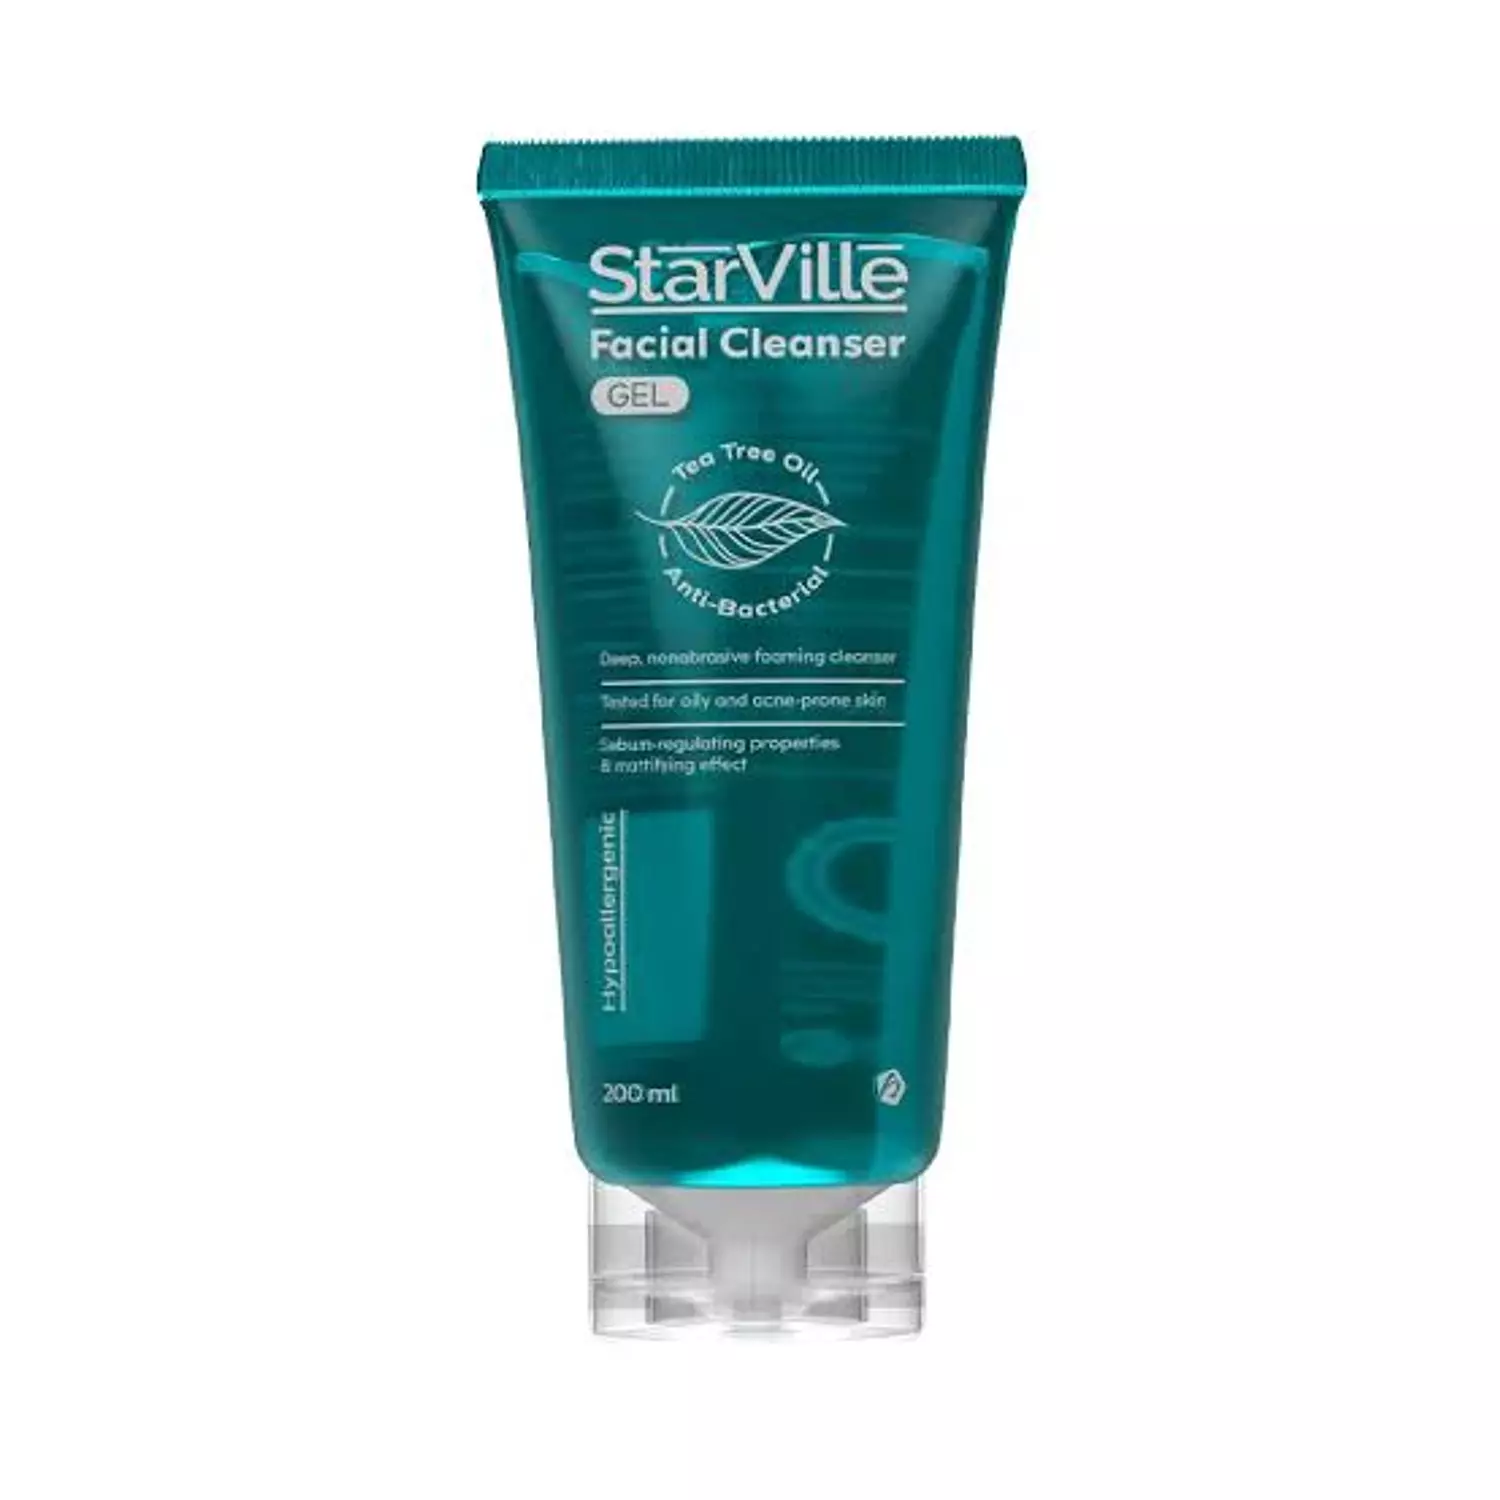 Starville Acne Prone Skin Facial Cleanser hover image